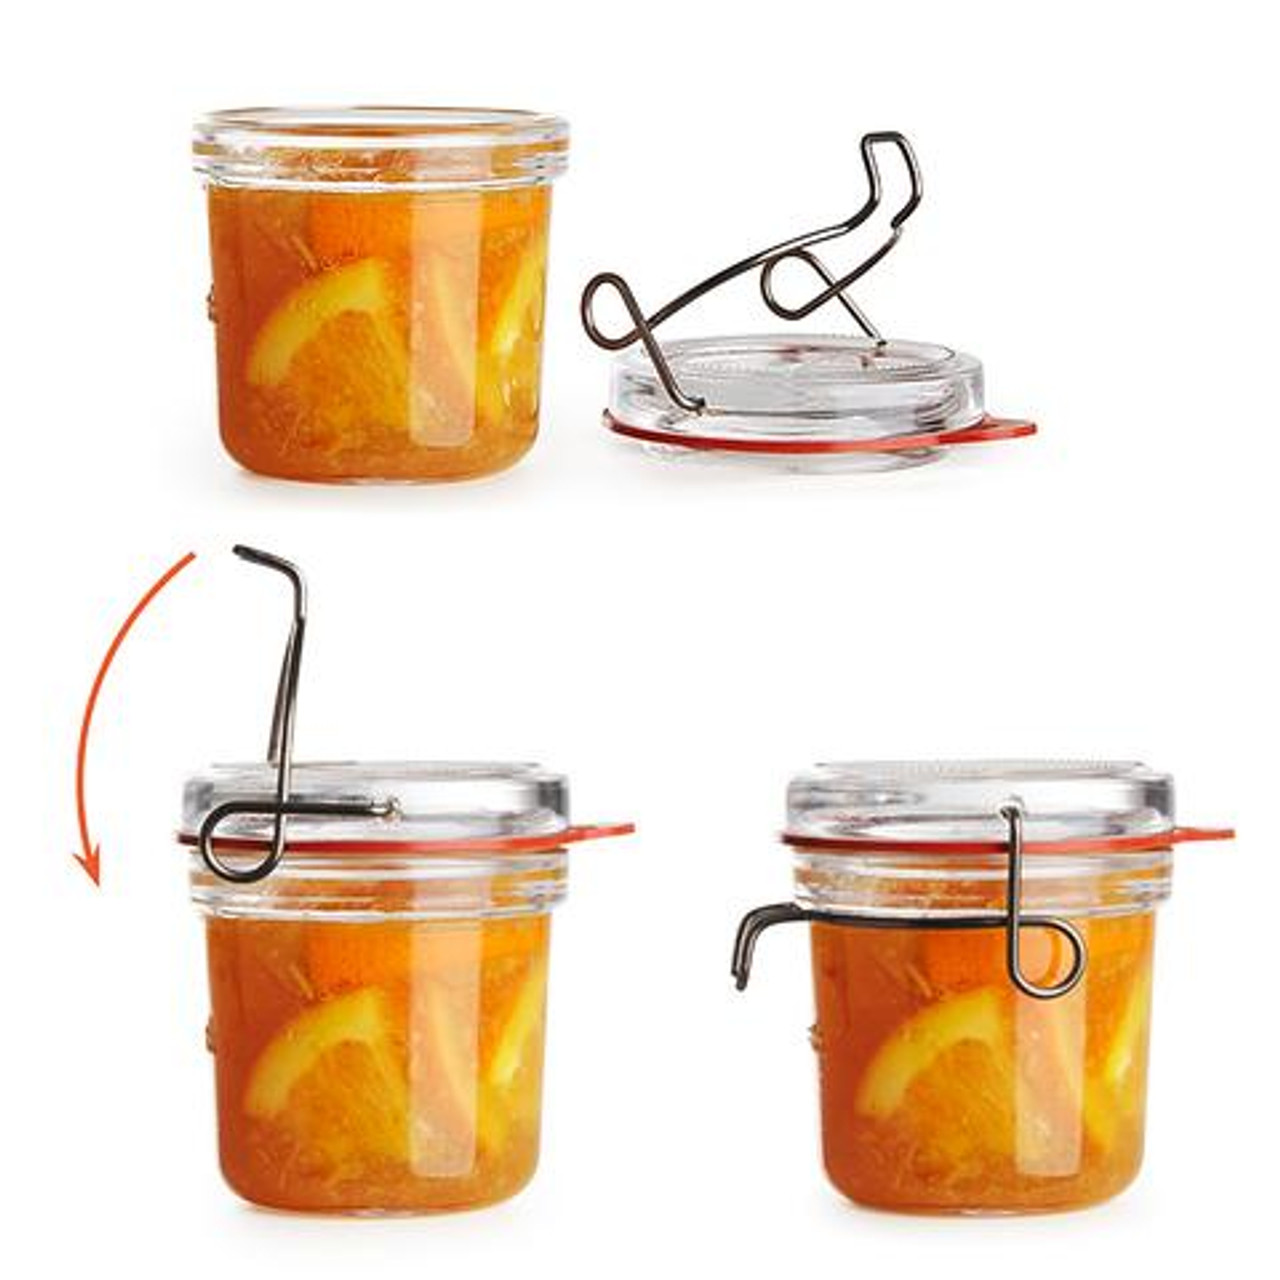 Lock-Eat Collection Jars have detachable lids and are easy to use. 